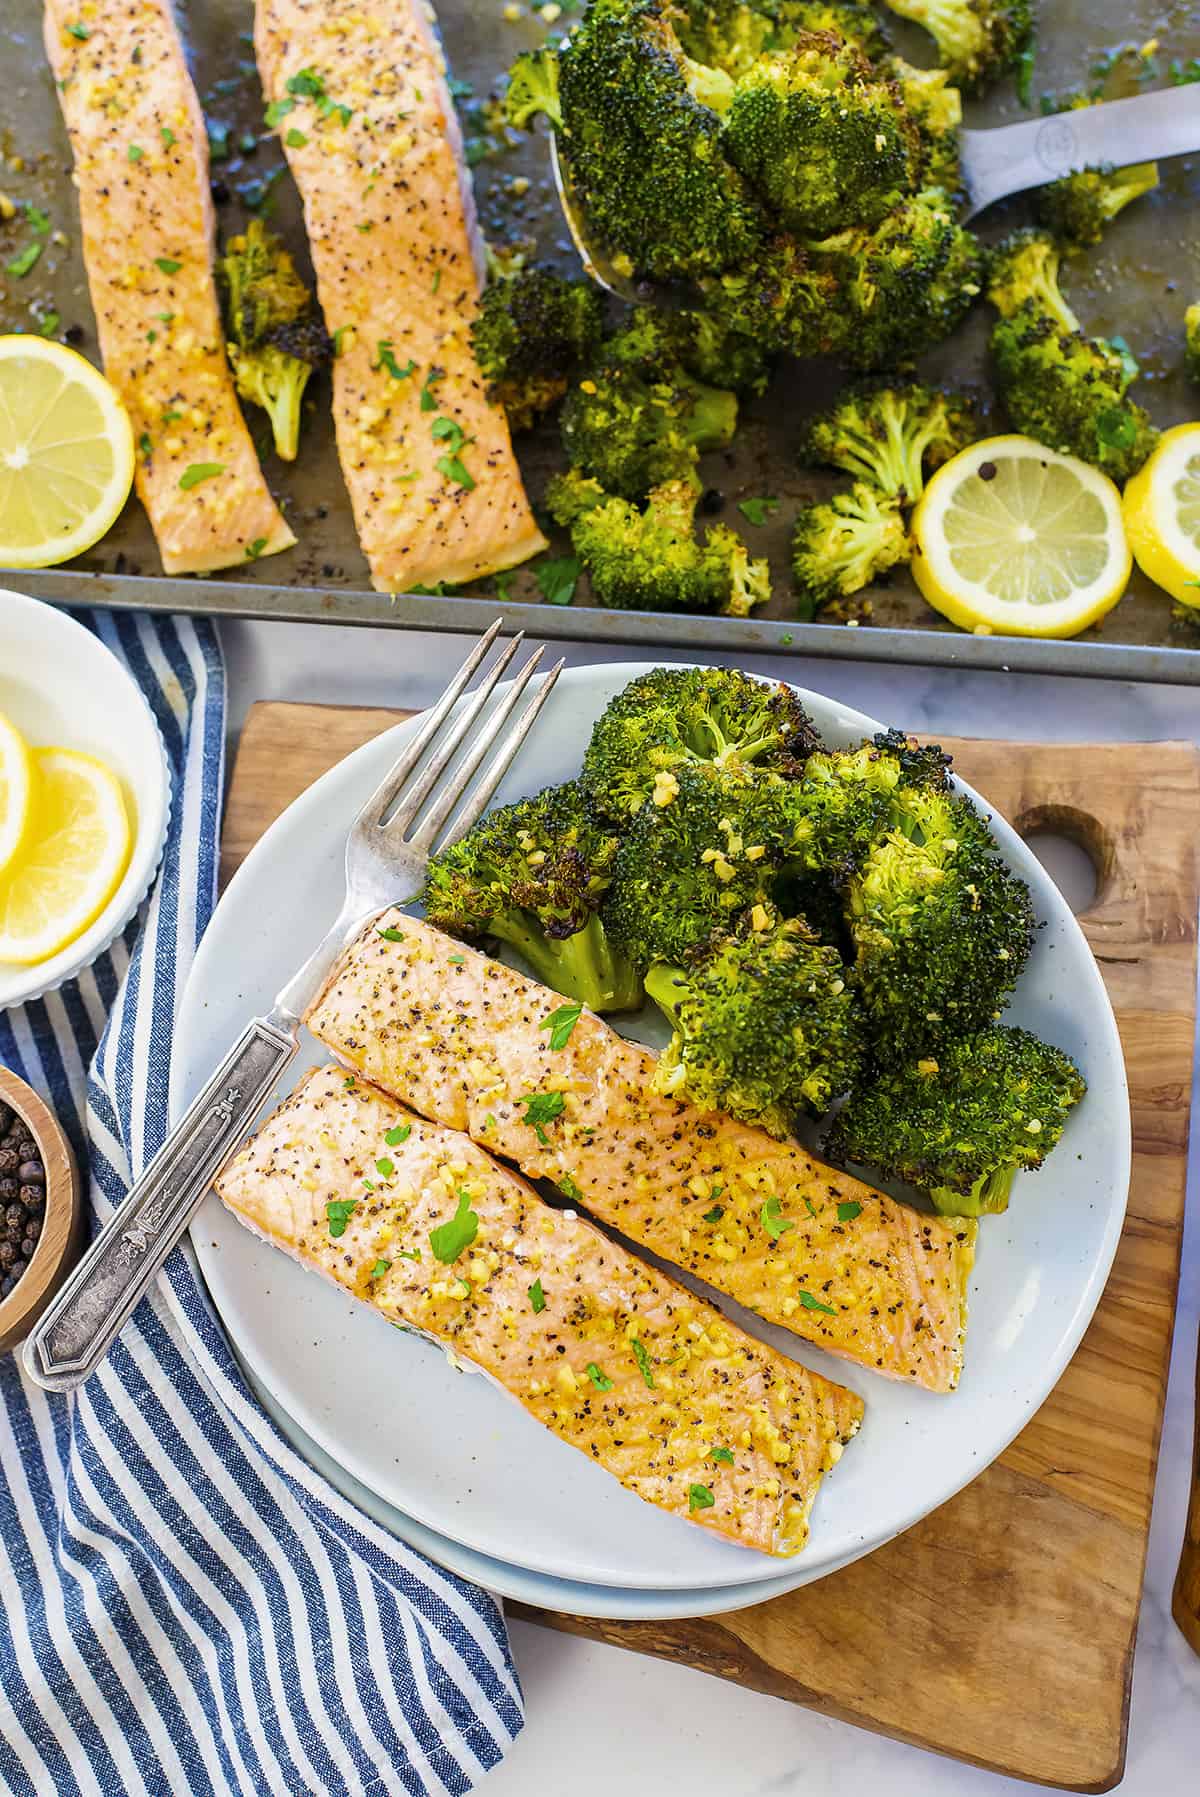 Overhead view of lemon pepper salmon and broccoli on plate.